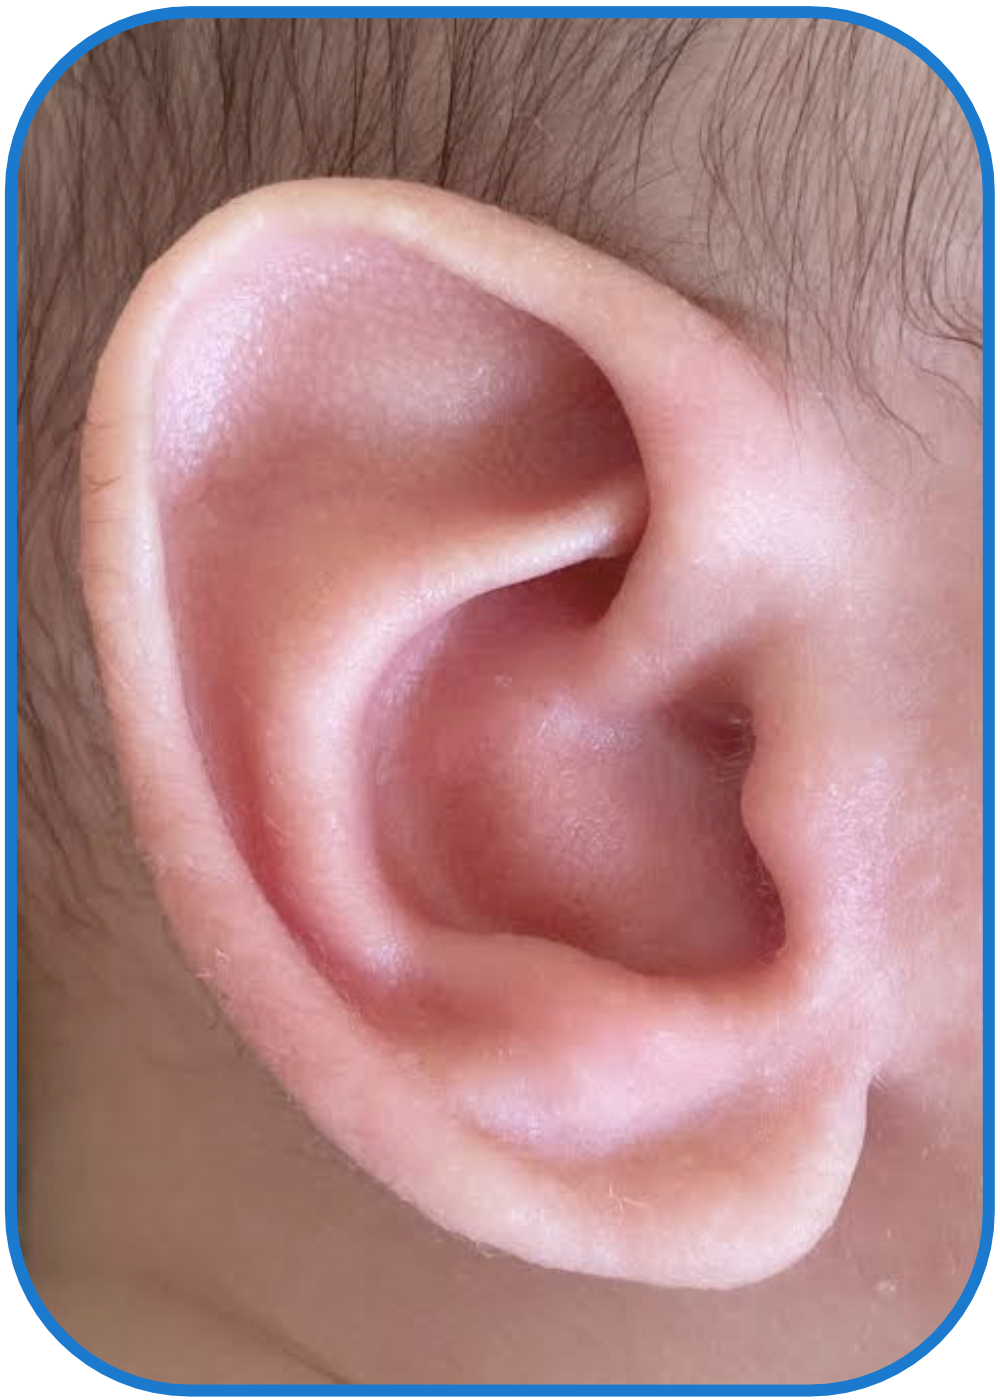 Baby photo after ear buddies used - longterm results